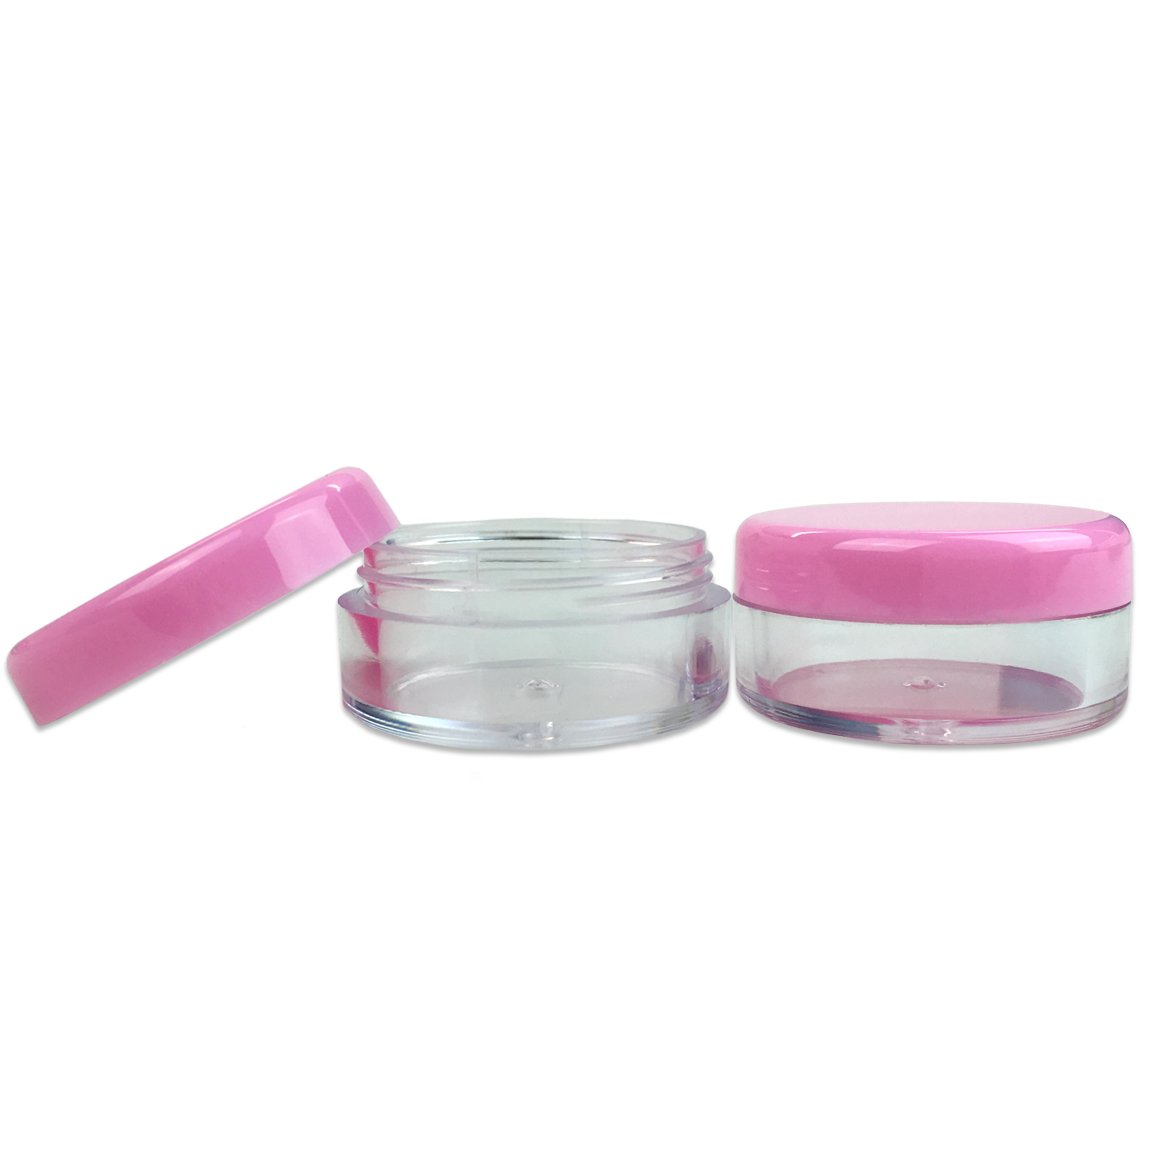 Beauticom 5G/5ML Clear Plastic Cosmetic Container Jars with PINK Lids, 50 Pcs